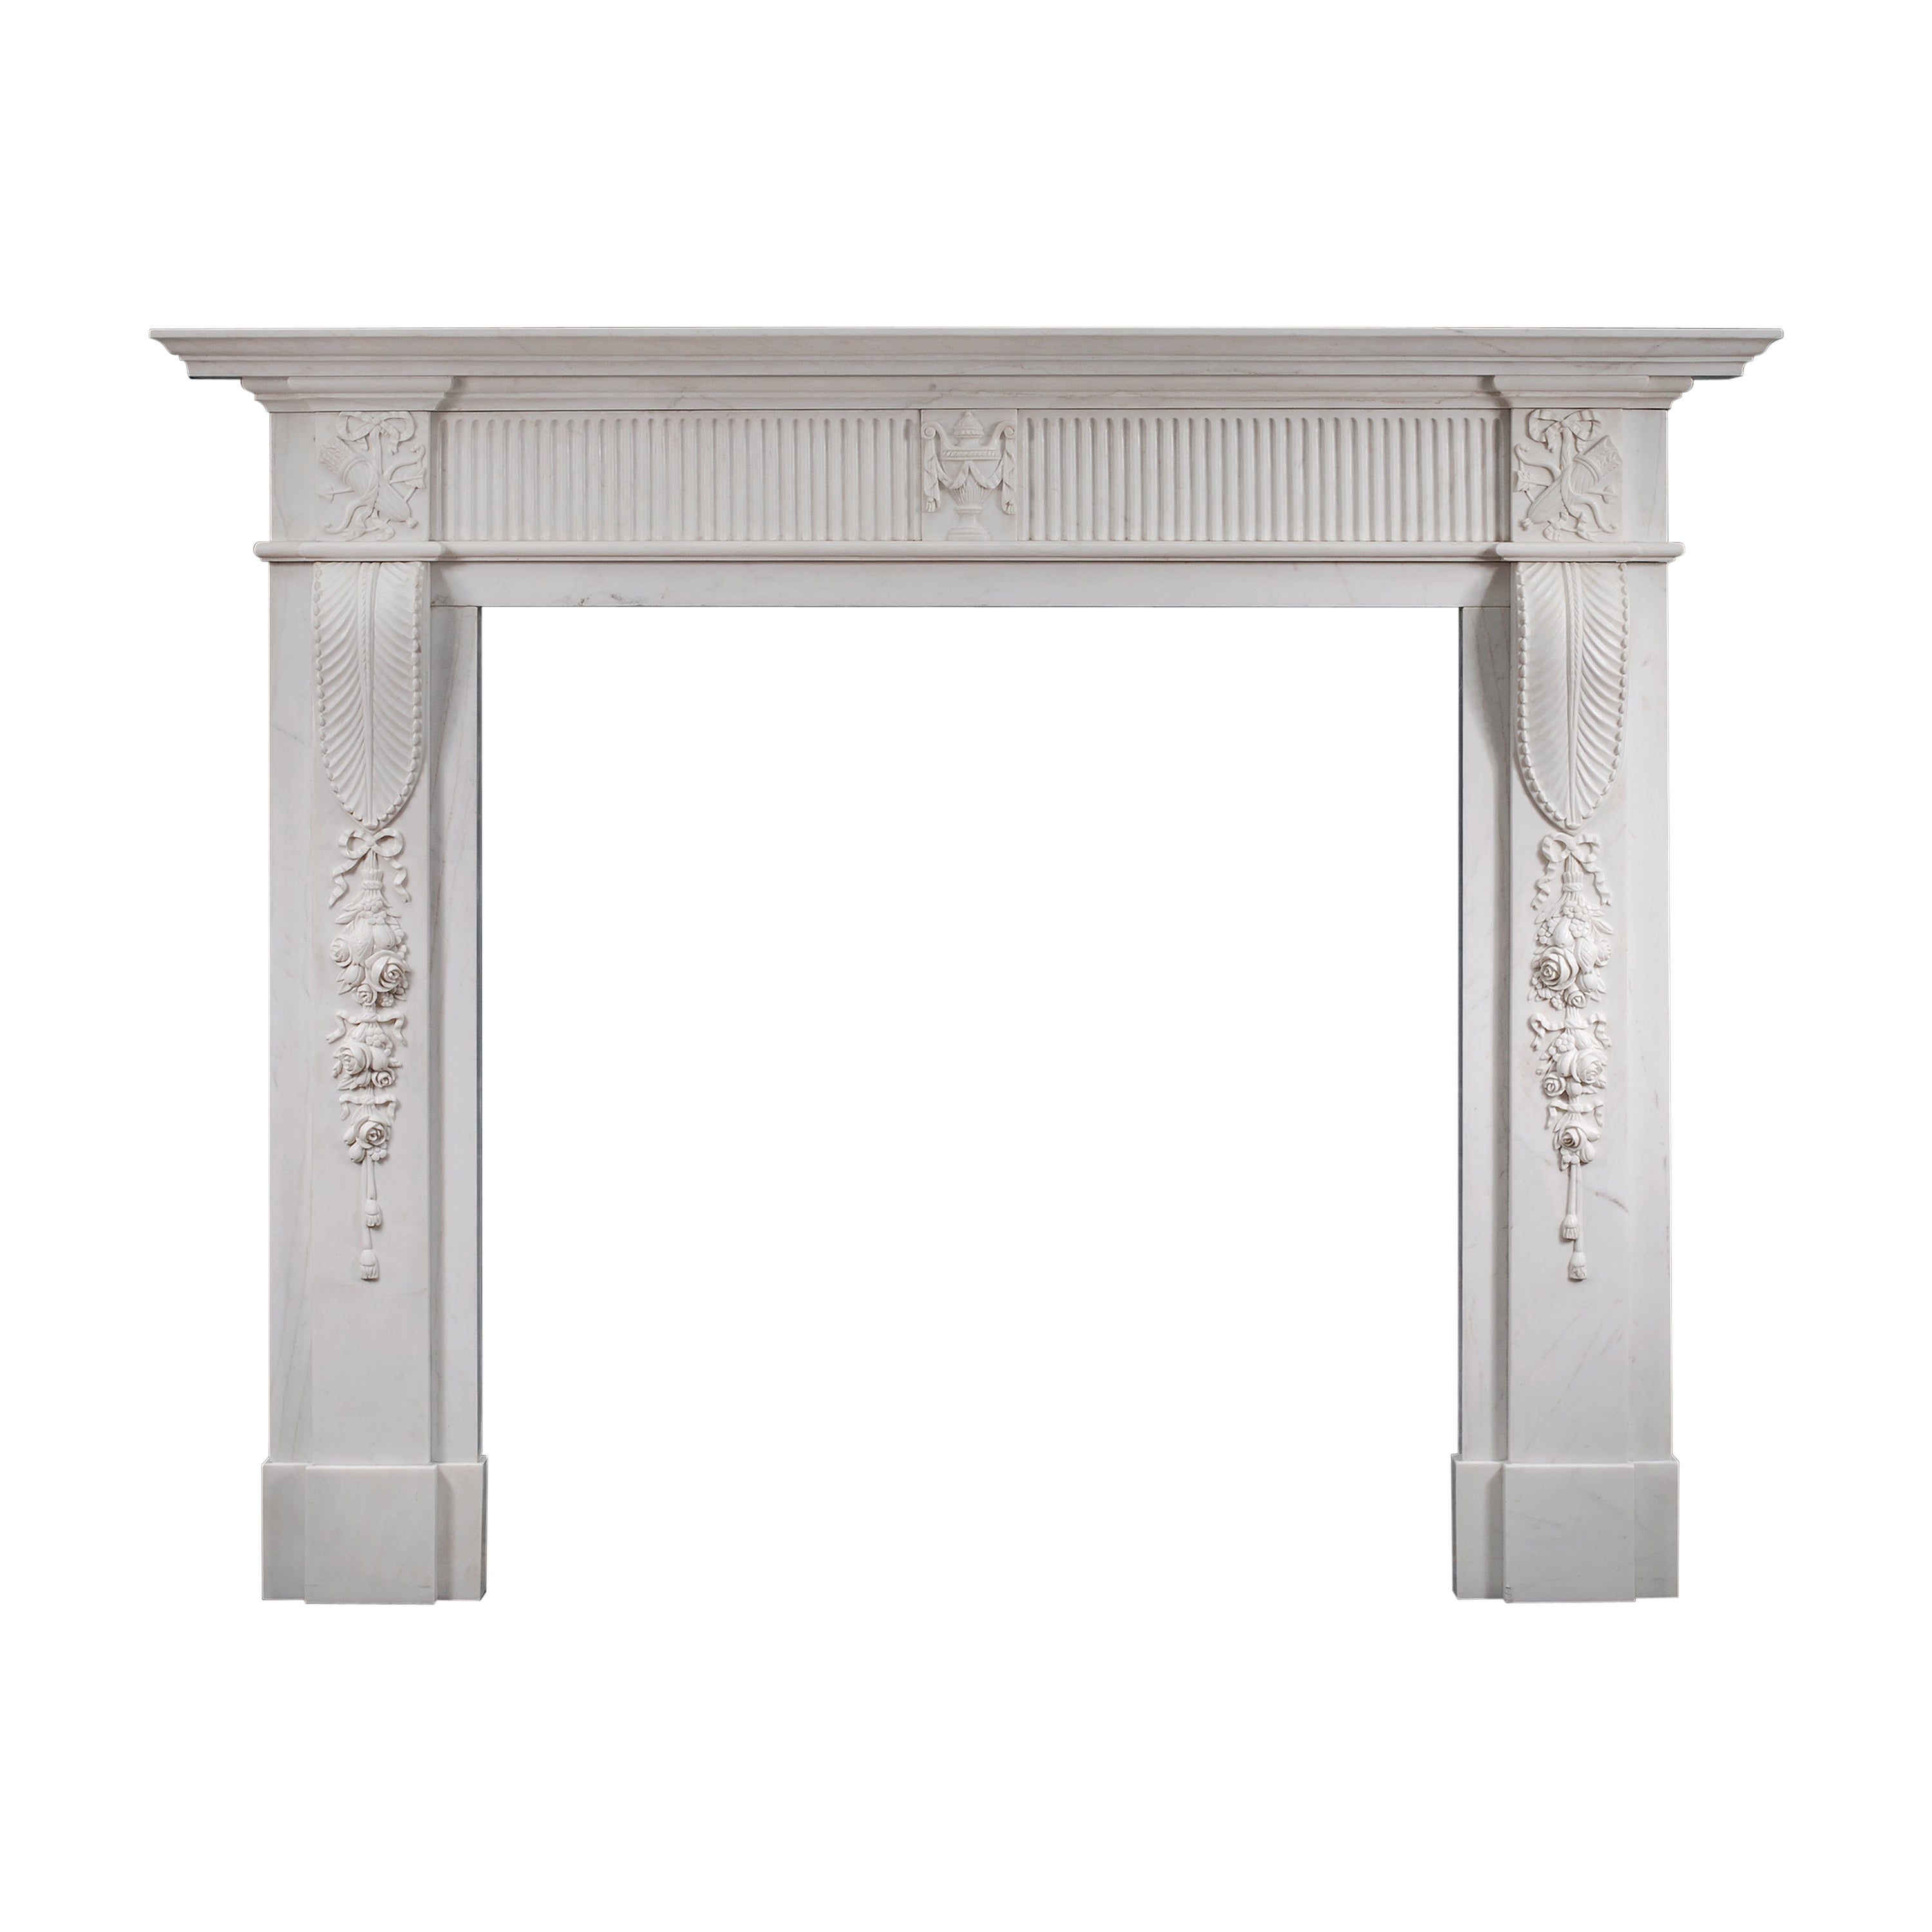 Georgian Style Fireplace in White Marble For Sale